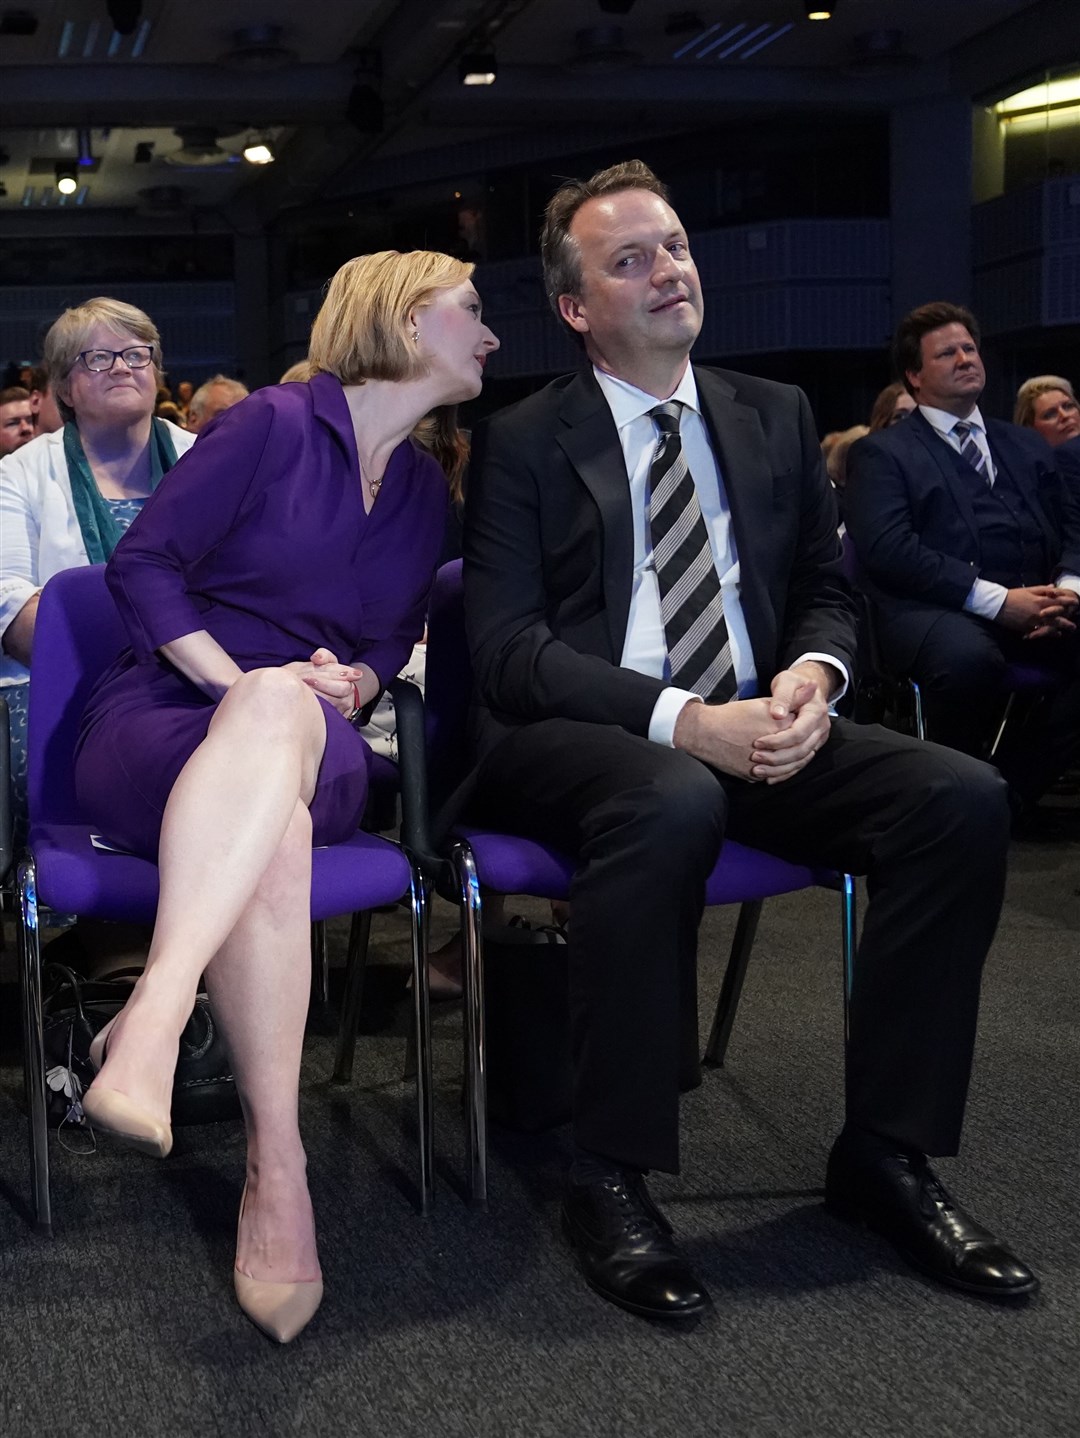 Liz Truss and her husband Hugh O’Leary at the Queen Elizabeth II Centre (Stefan Rousseau/PA)